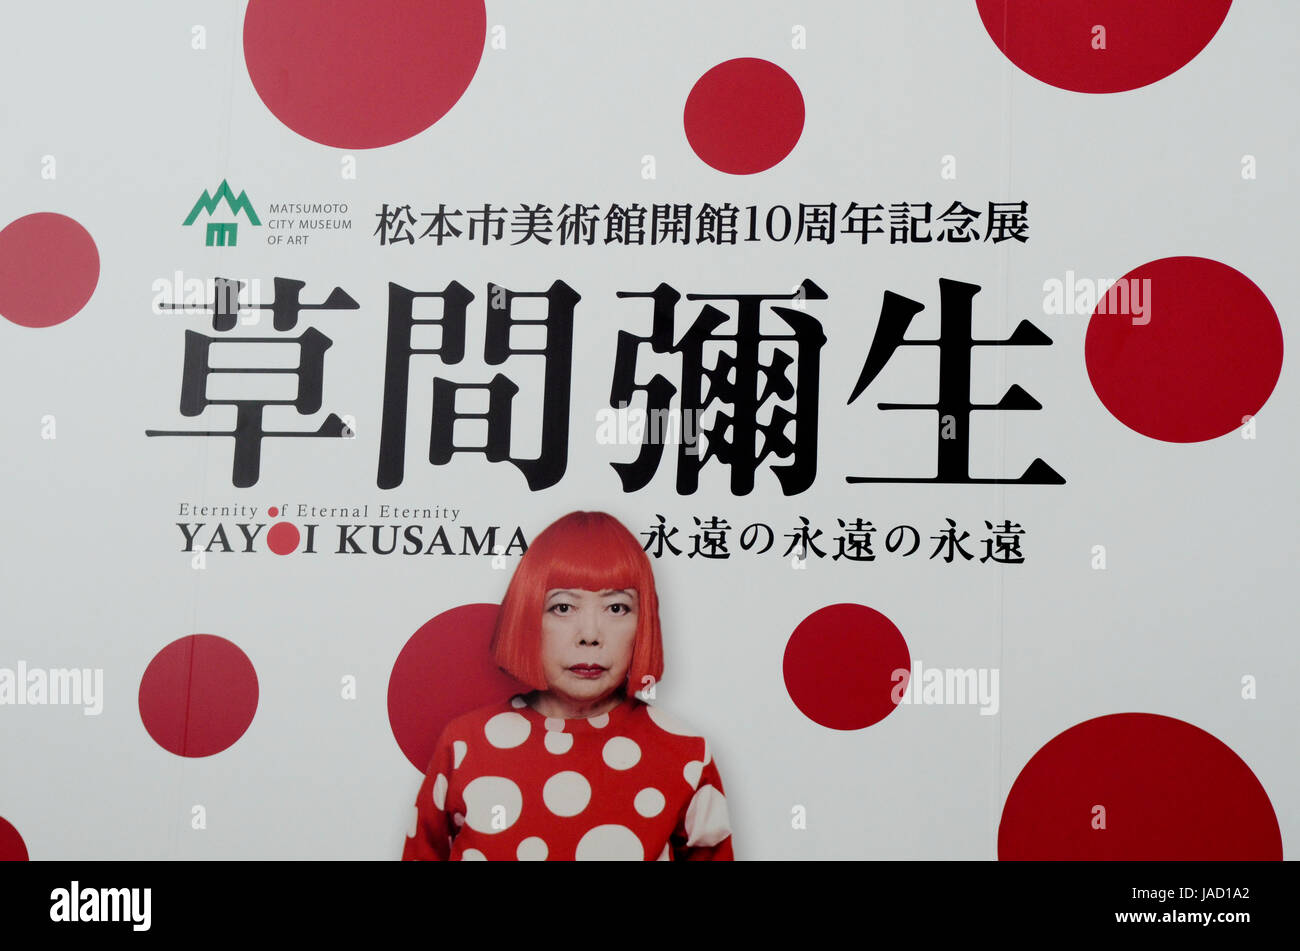 YAYOI KUSAMA - posters for the 'Eternity of Eternal Eternity' exhbition held at the Matsumoto City Museum of Art from Jul - Nov 2012  in Matsumoto, Nagano Prefecture, Japan - 28 Jul 2012.  Photo credit: George Chin/IconicPix Stock Photo